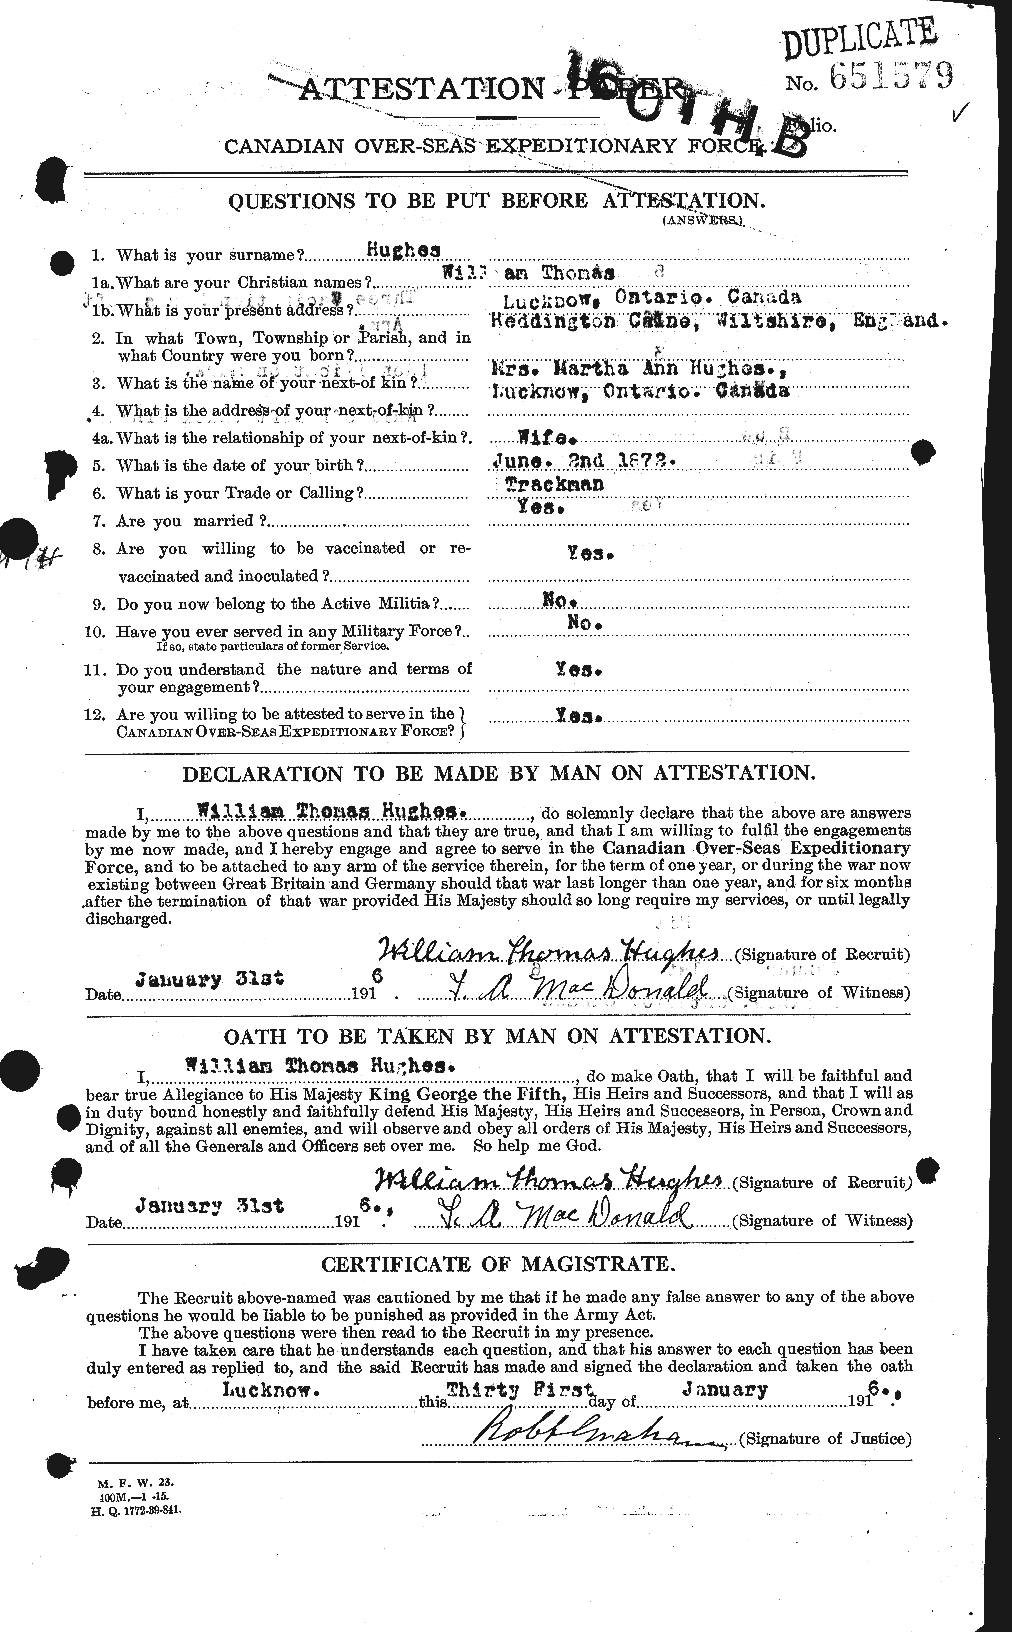 Personnel Records of the First World War - CEF 405961a